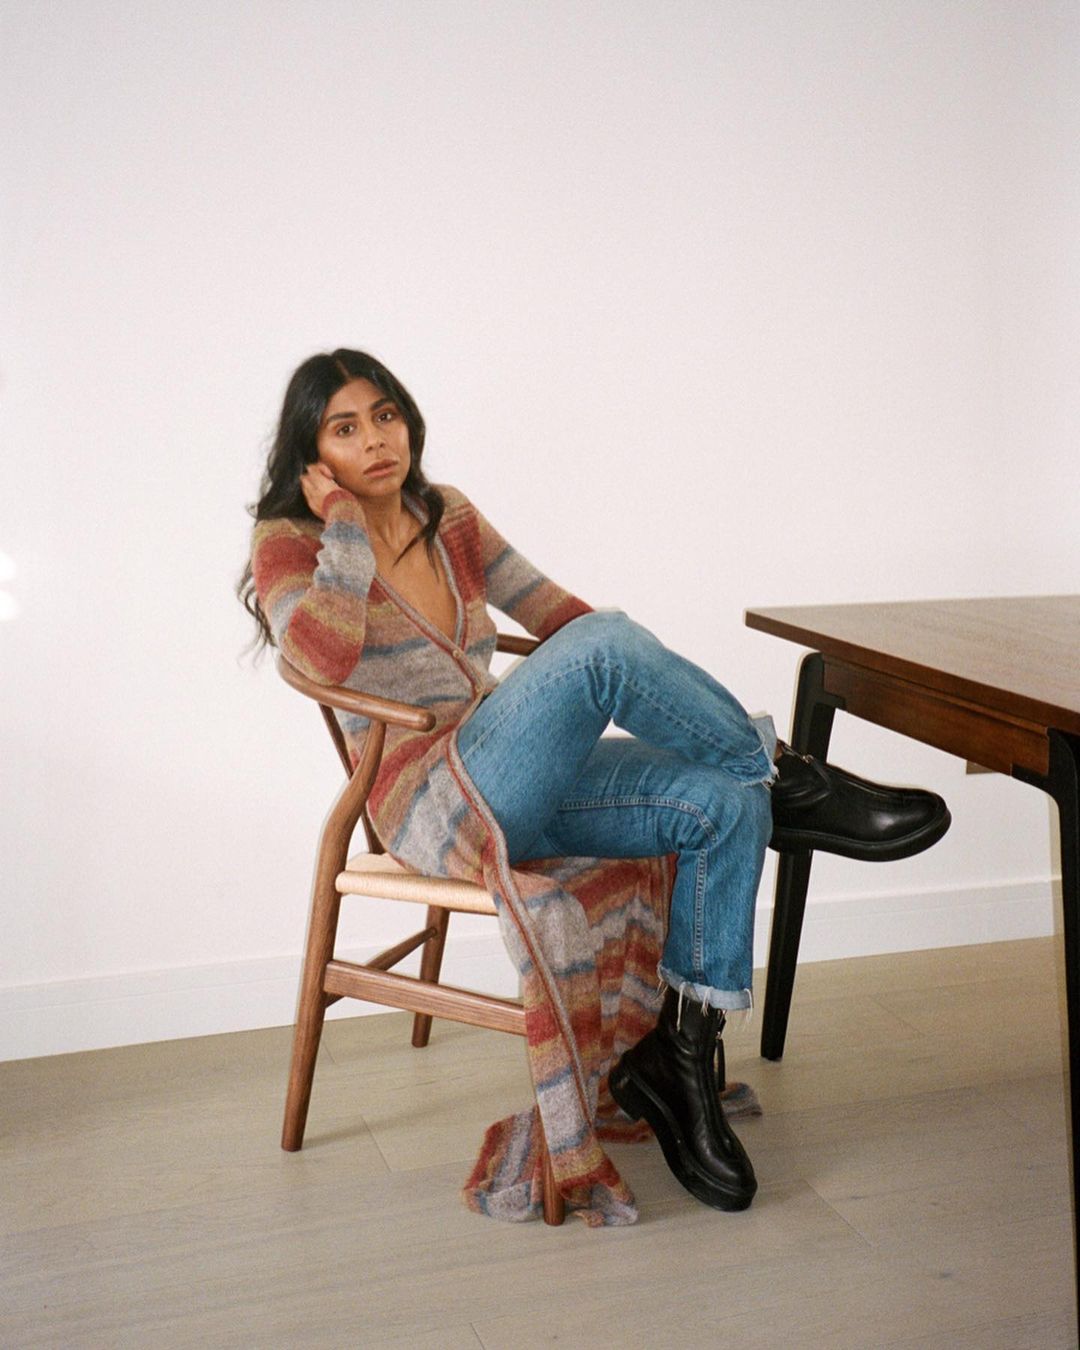 Jeans Outfit Ideas: @monikh wears blue jeans with a maxi cardigan